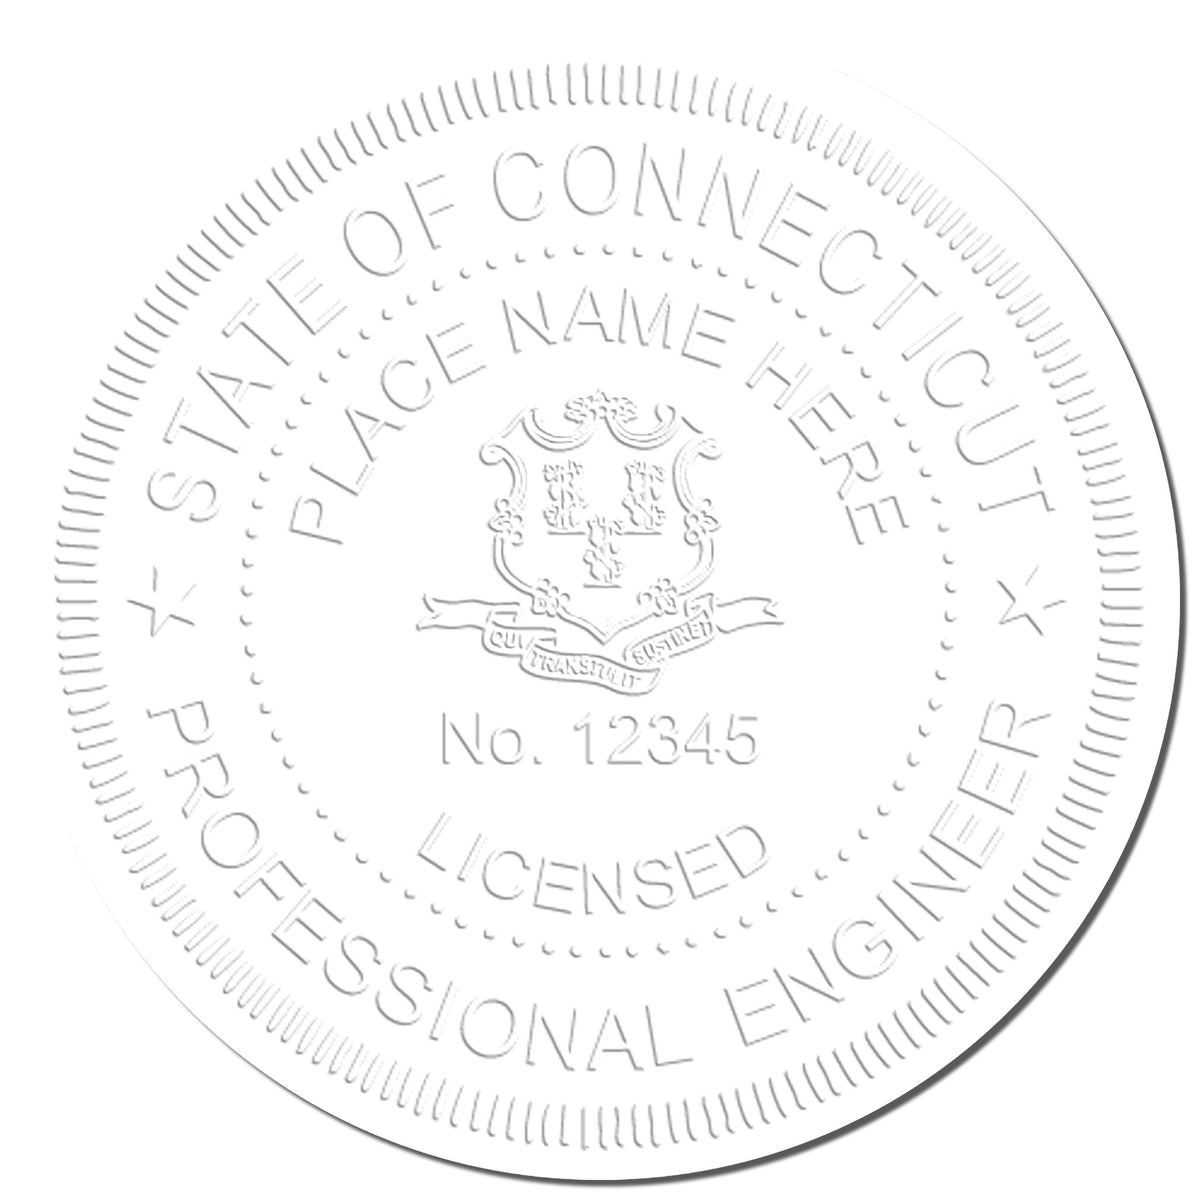 This paper is stamped with a sample imprint of the State of Connecticut Extended Long Reach Engineer Seal, signifying its quality and reliability.